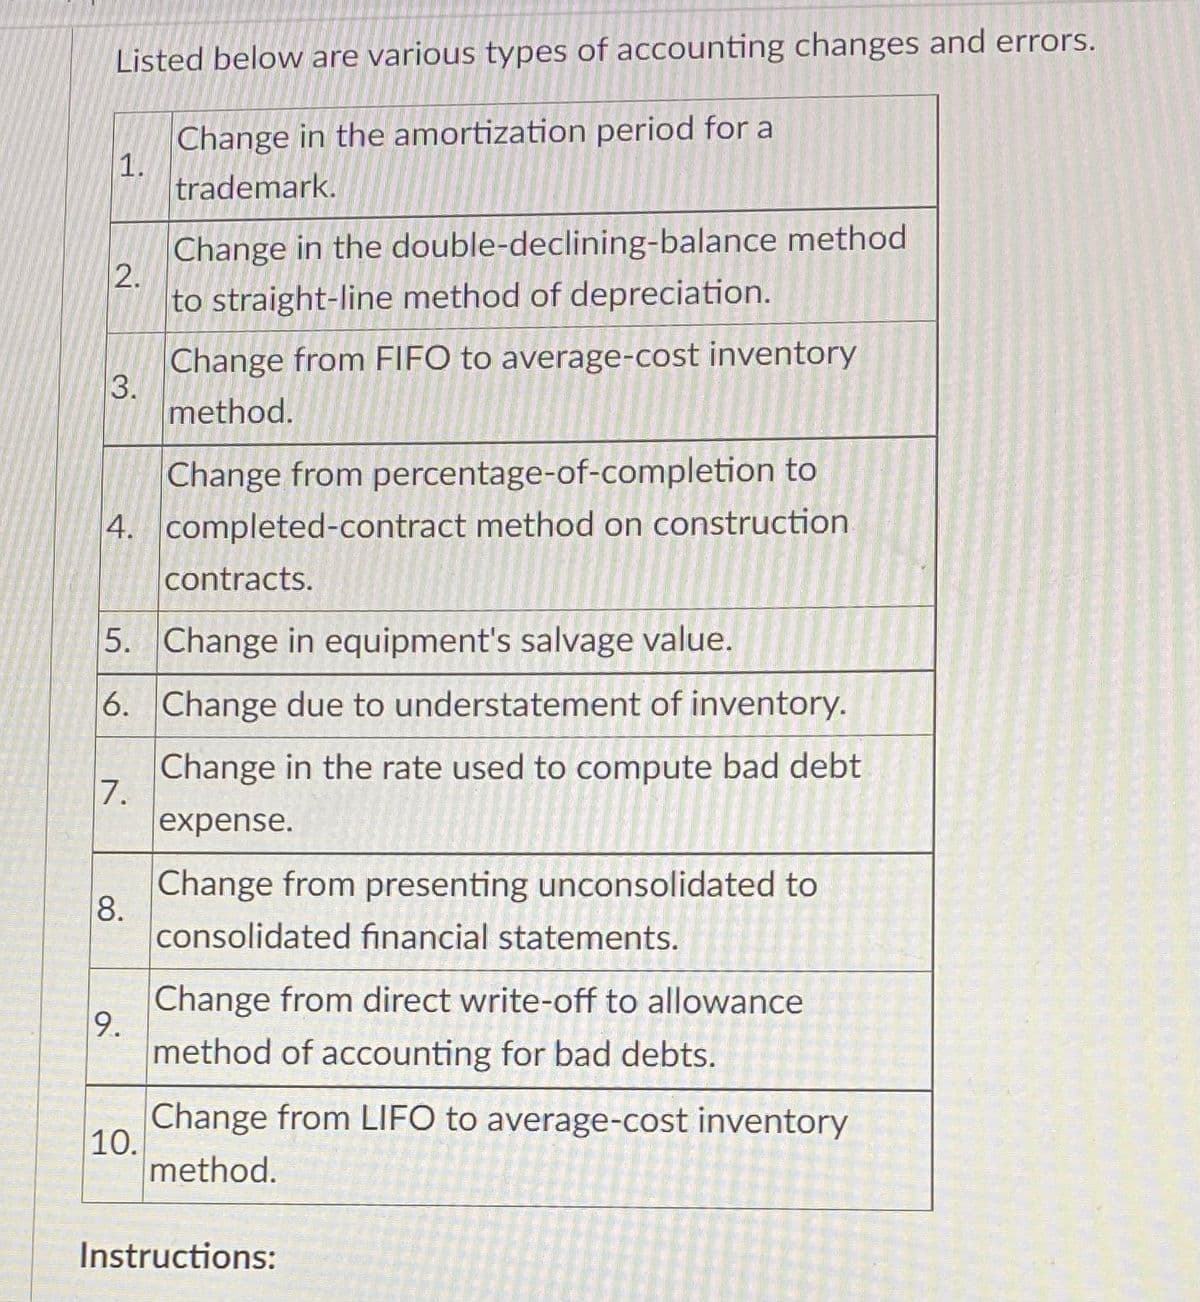 Listed below are various types of accounting changes and errors.
Change in the amortization period for a
trademark.
1.
2.
Change in the double-declining-balance method
to straight-line method of depreciation.
3.
Change from percentage-of-completion to
4. completed-contract method on construction
contracts.
5. Change in equipment's salvage value.
6.
Change due to understatement of inventory.
Change in the rate used to compute bad debt
expense.
7.
8.
Change from FIFO to average-cost inventory
method.
9.
10.
Change from presenting unconsolidated to
consolidated financial statements.
Change from direct write-off to allowance
method of accounting for bad debts.
Change from LIFO to average-cost inventory
method.
Instructions: